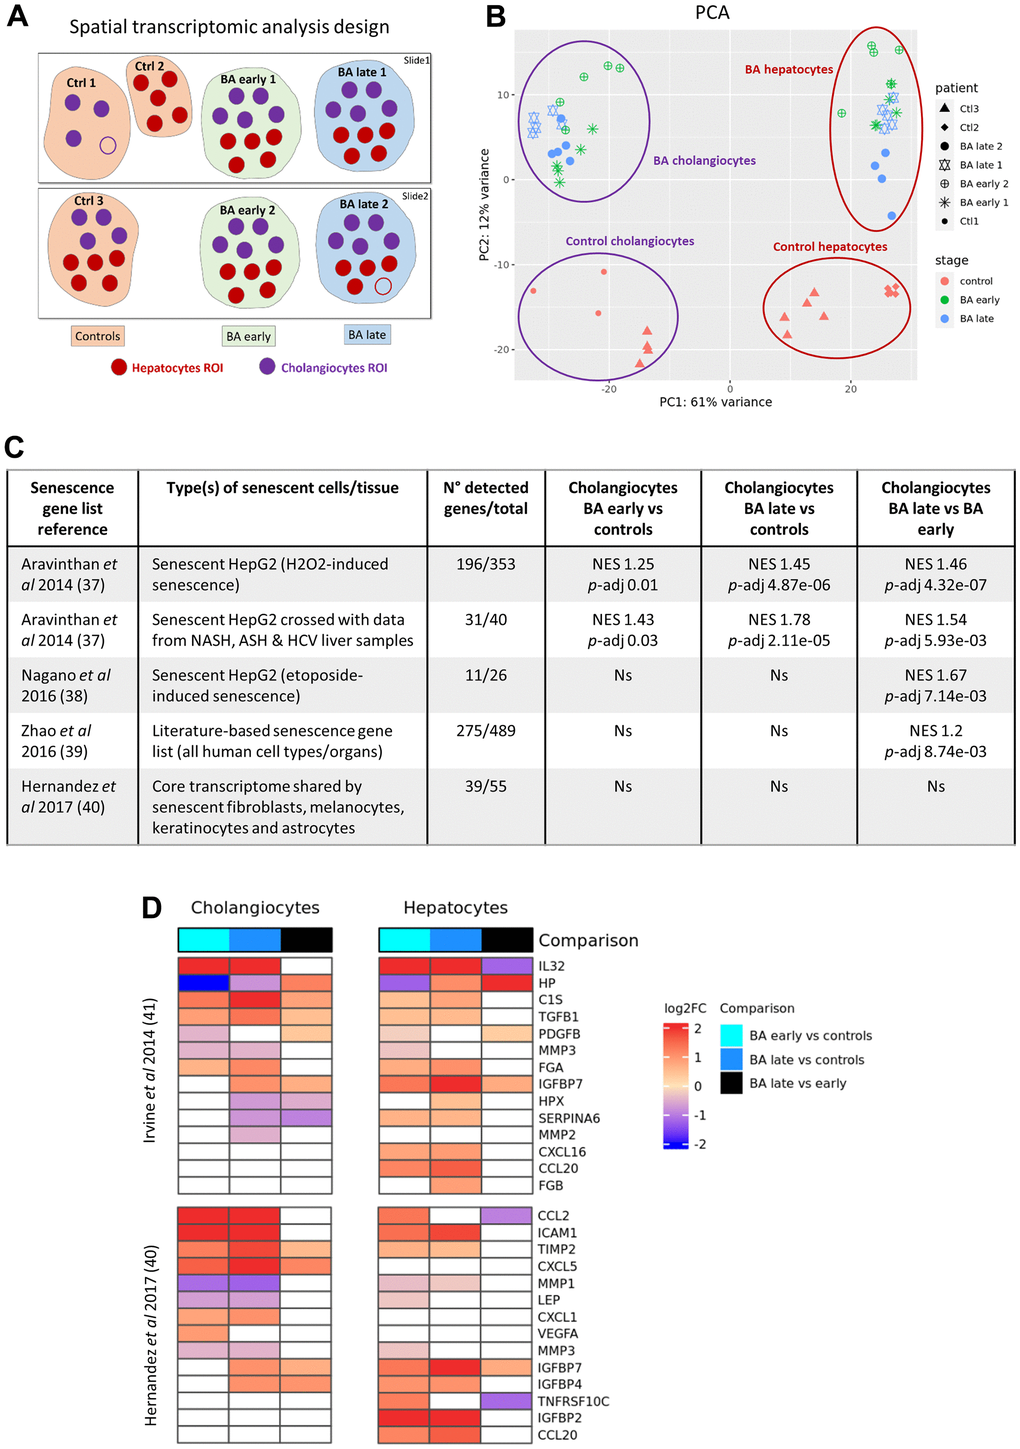 Digital spatial whole transcriptomic analysis in BA livers. (A) Design of the analysis. (B) PCA of the dataset. (C) Enrichment analysis of published senescence gene lists between cholangiocytes subgroups. (D) Heatmaps of SASP genes obtained from two different published datasets in cholangiocytes and hepatocytes subgroups. BA: biliary atresia; Ctrl: control; FC: fold change; NES: normalized enrichment score; p-adj: adjusted p-value; PCA: principal component analysis; ROI: region of interest; SASP: senescence-associated secretory phenotype.